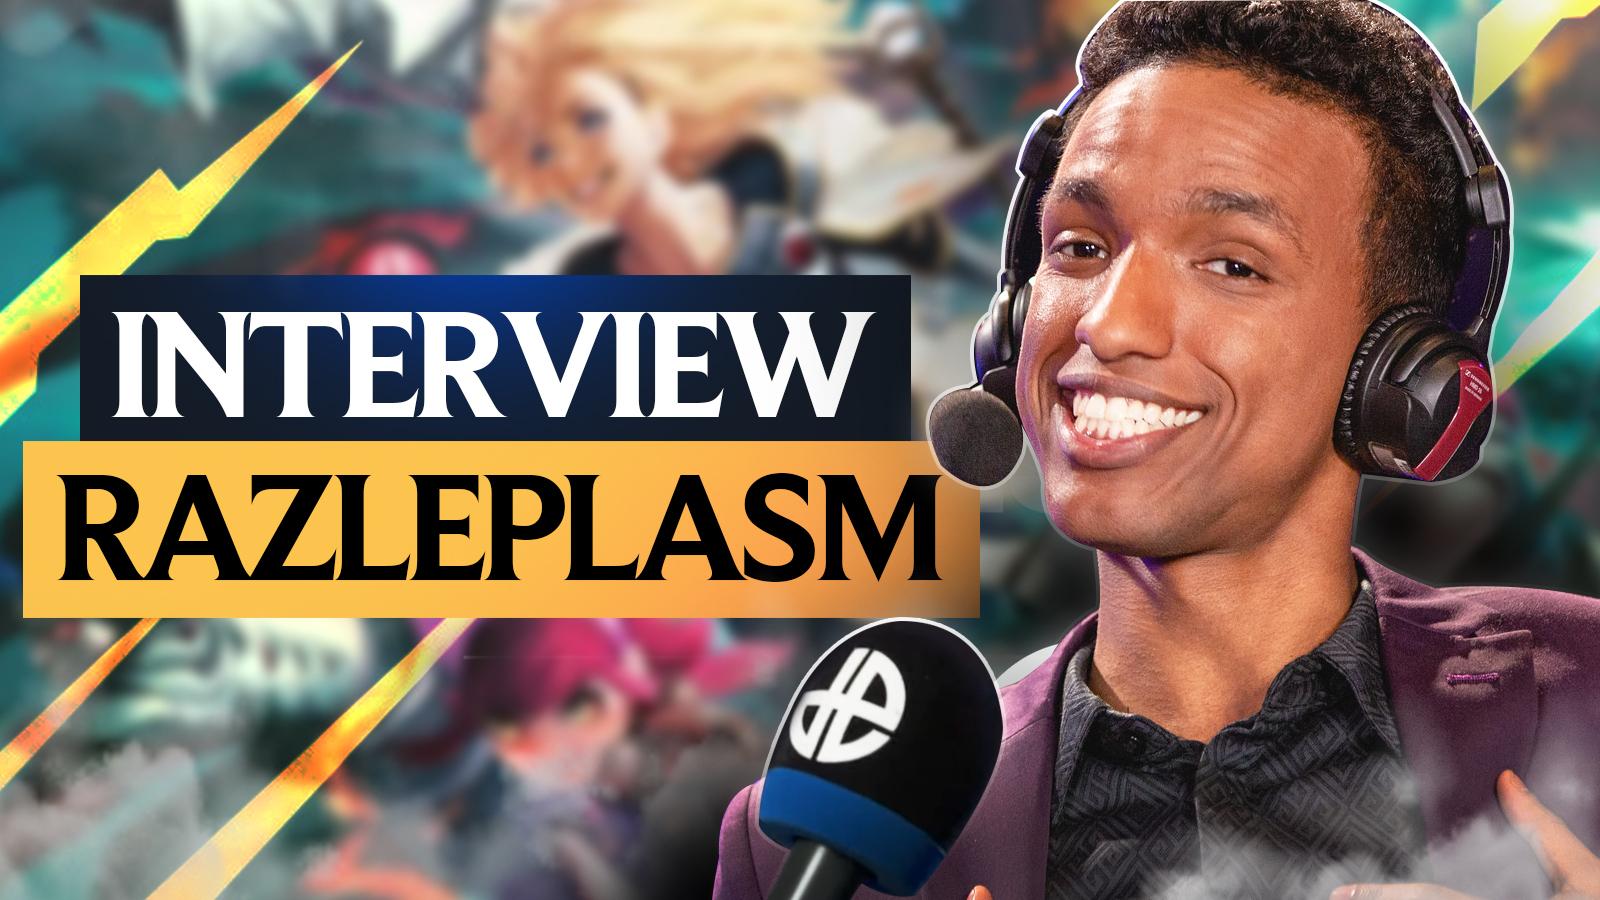 League_of_Legends_LoL_LCS_caster_Raz_on_people_of_color_in_esports